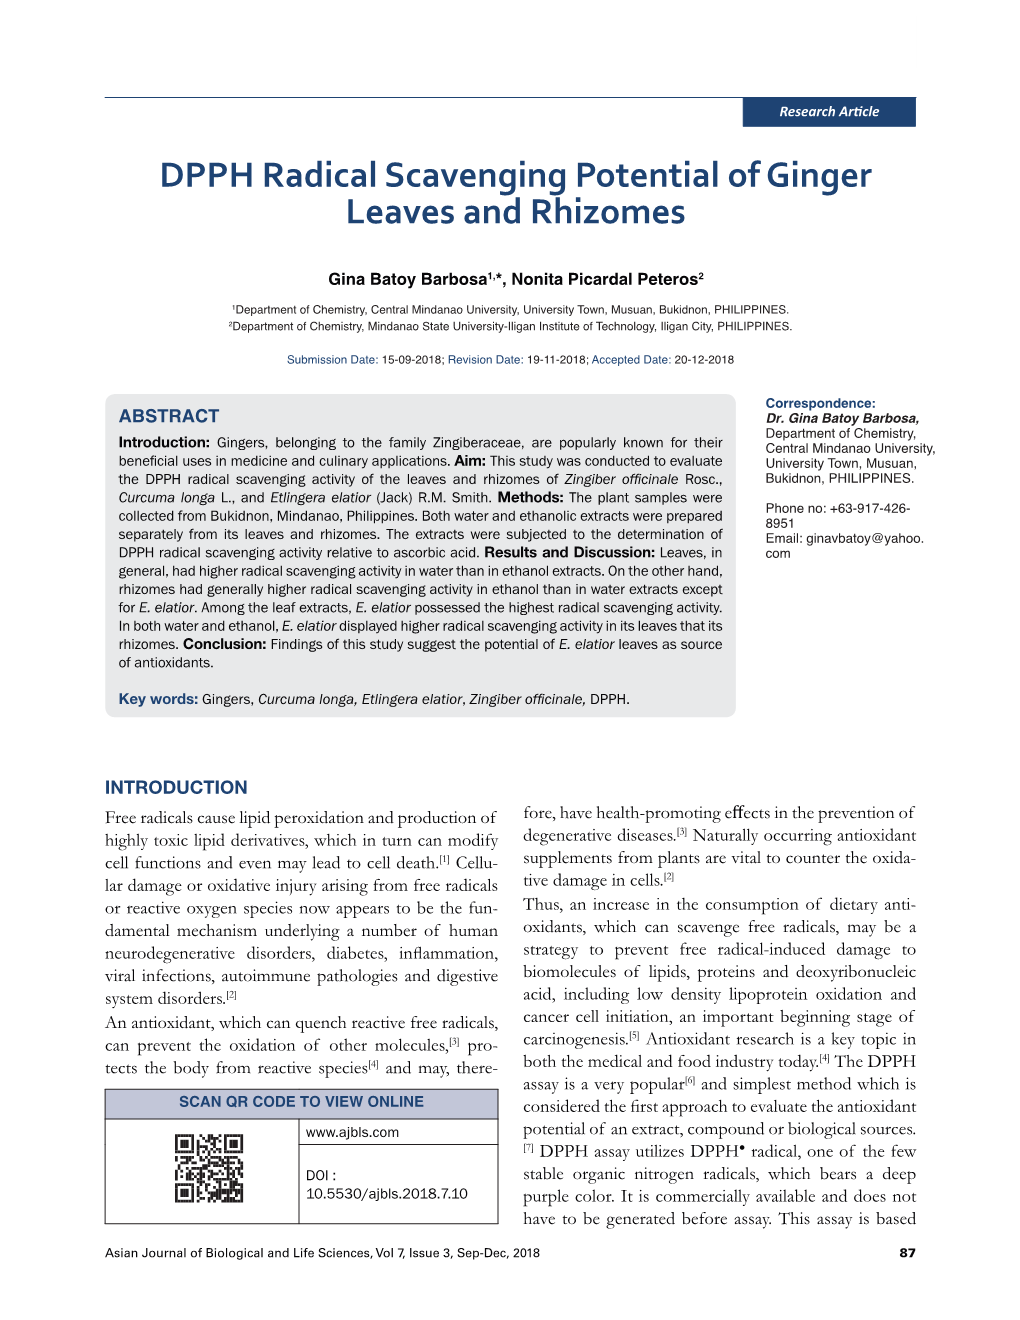 DPPH Radical Scavenging Potential of Ginger Leaves and Rhizomes